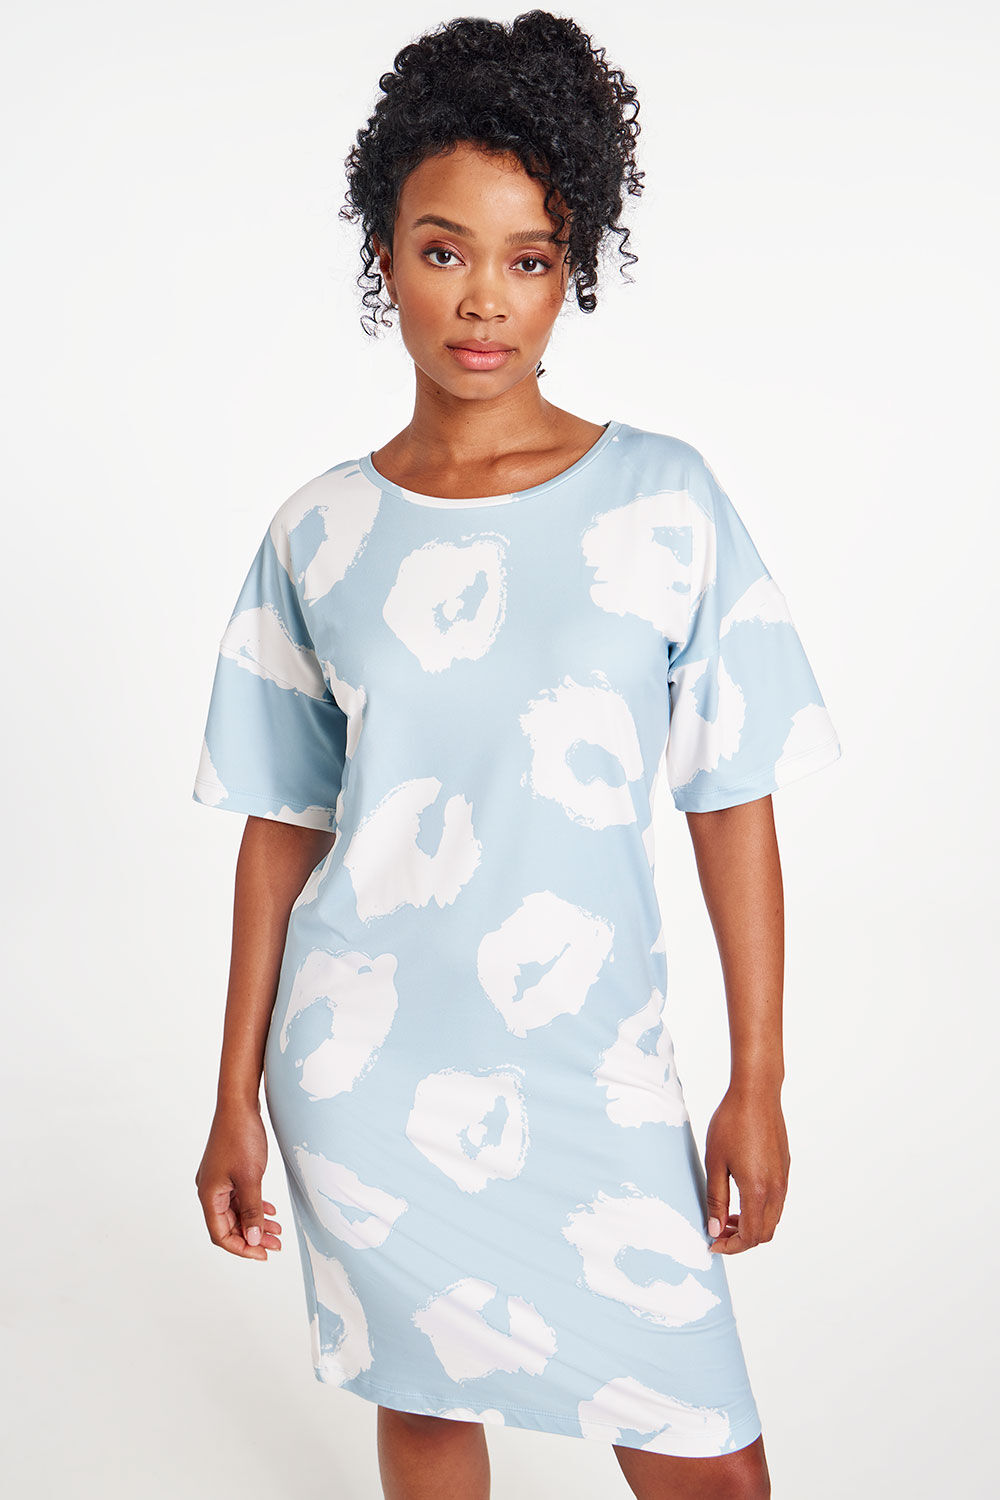 Bonmarche Blue Short Sleeve All Over Animal Print Soft Touch Nightdress, Size: 20-22